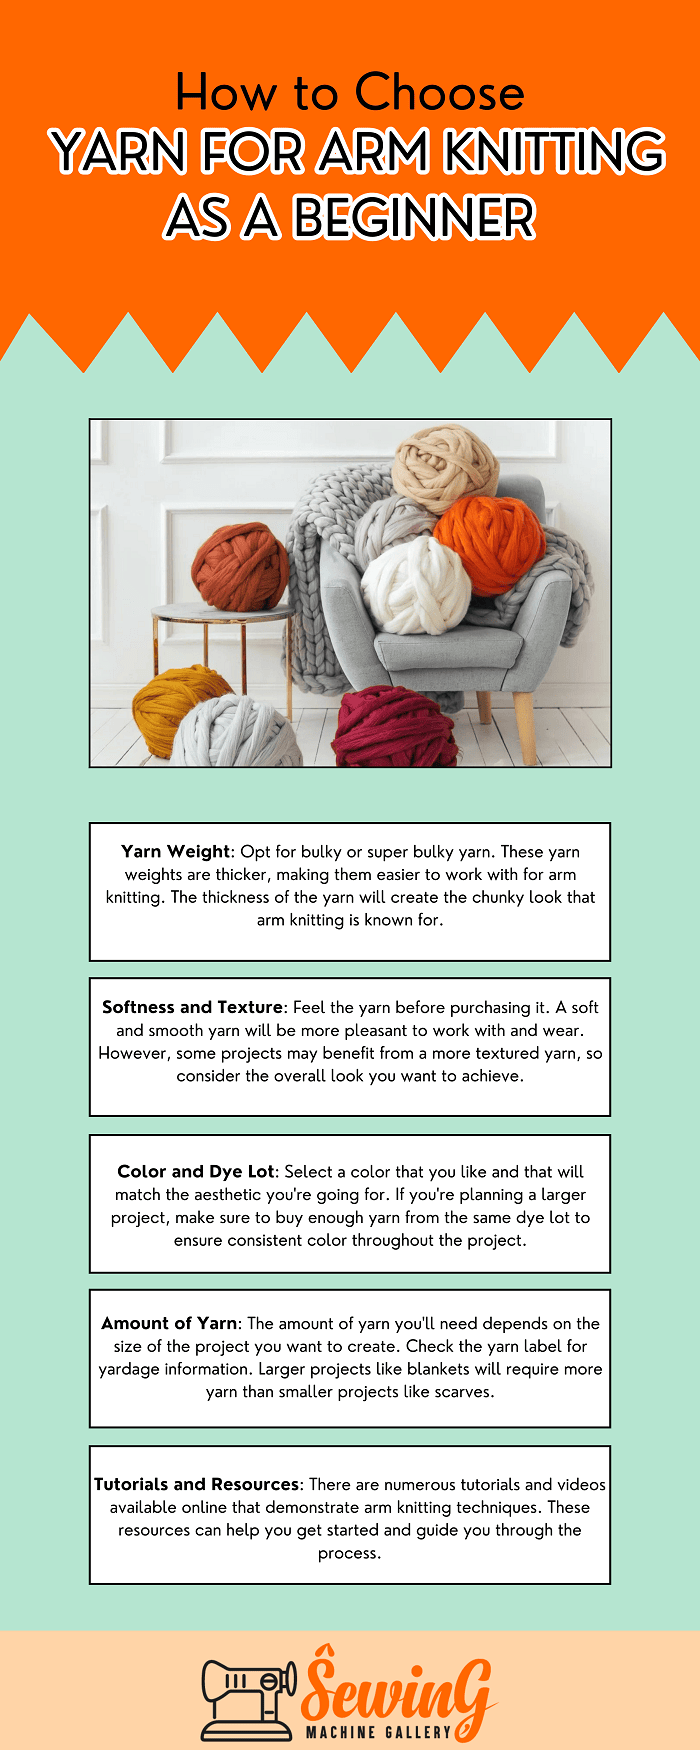 How to choose yarn for arm knitting as a beginners